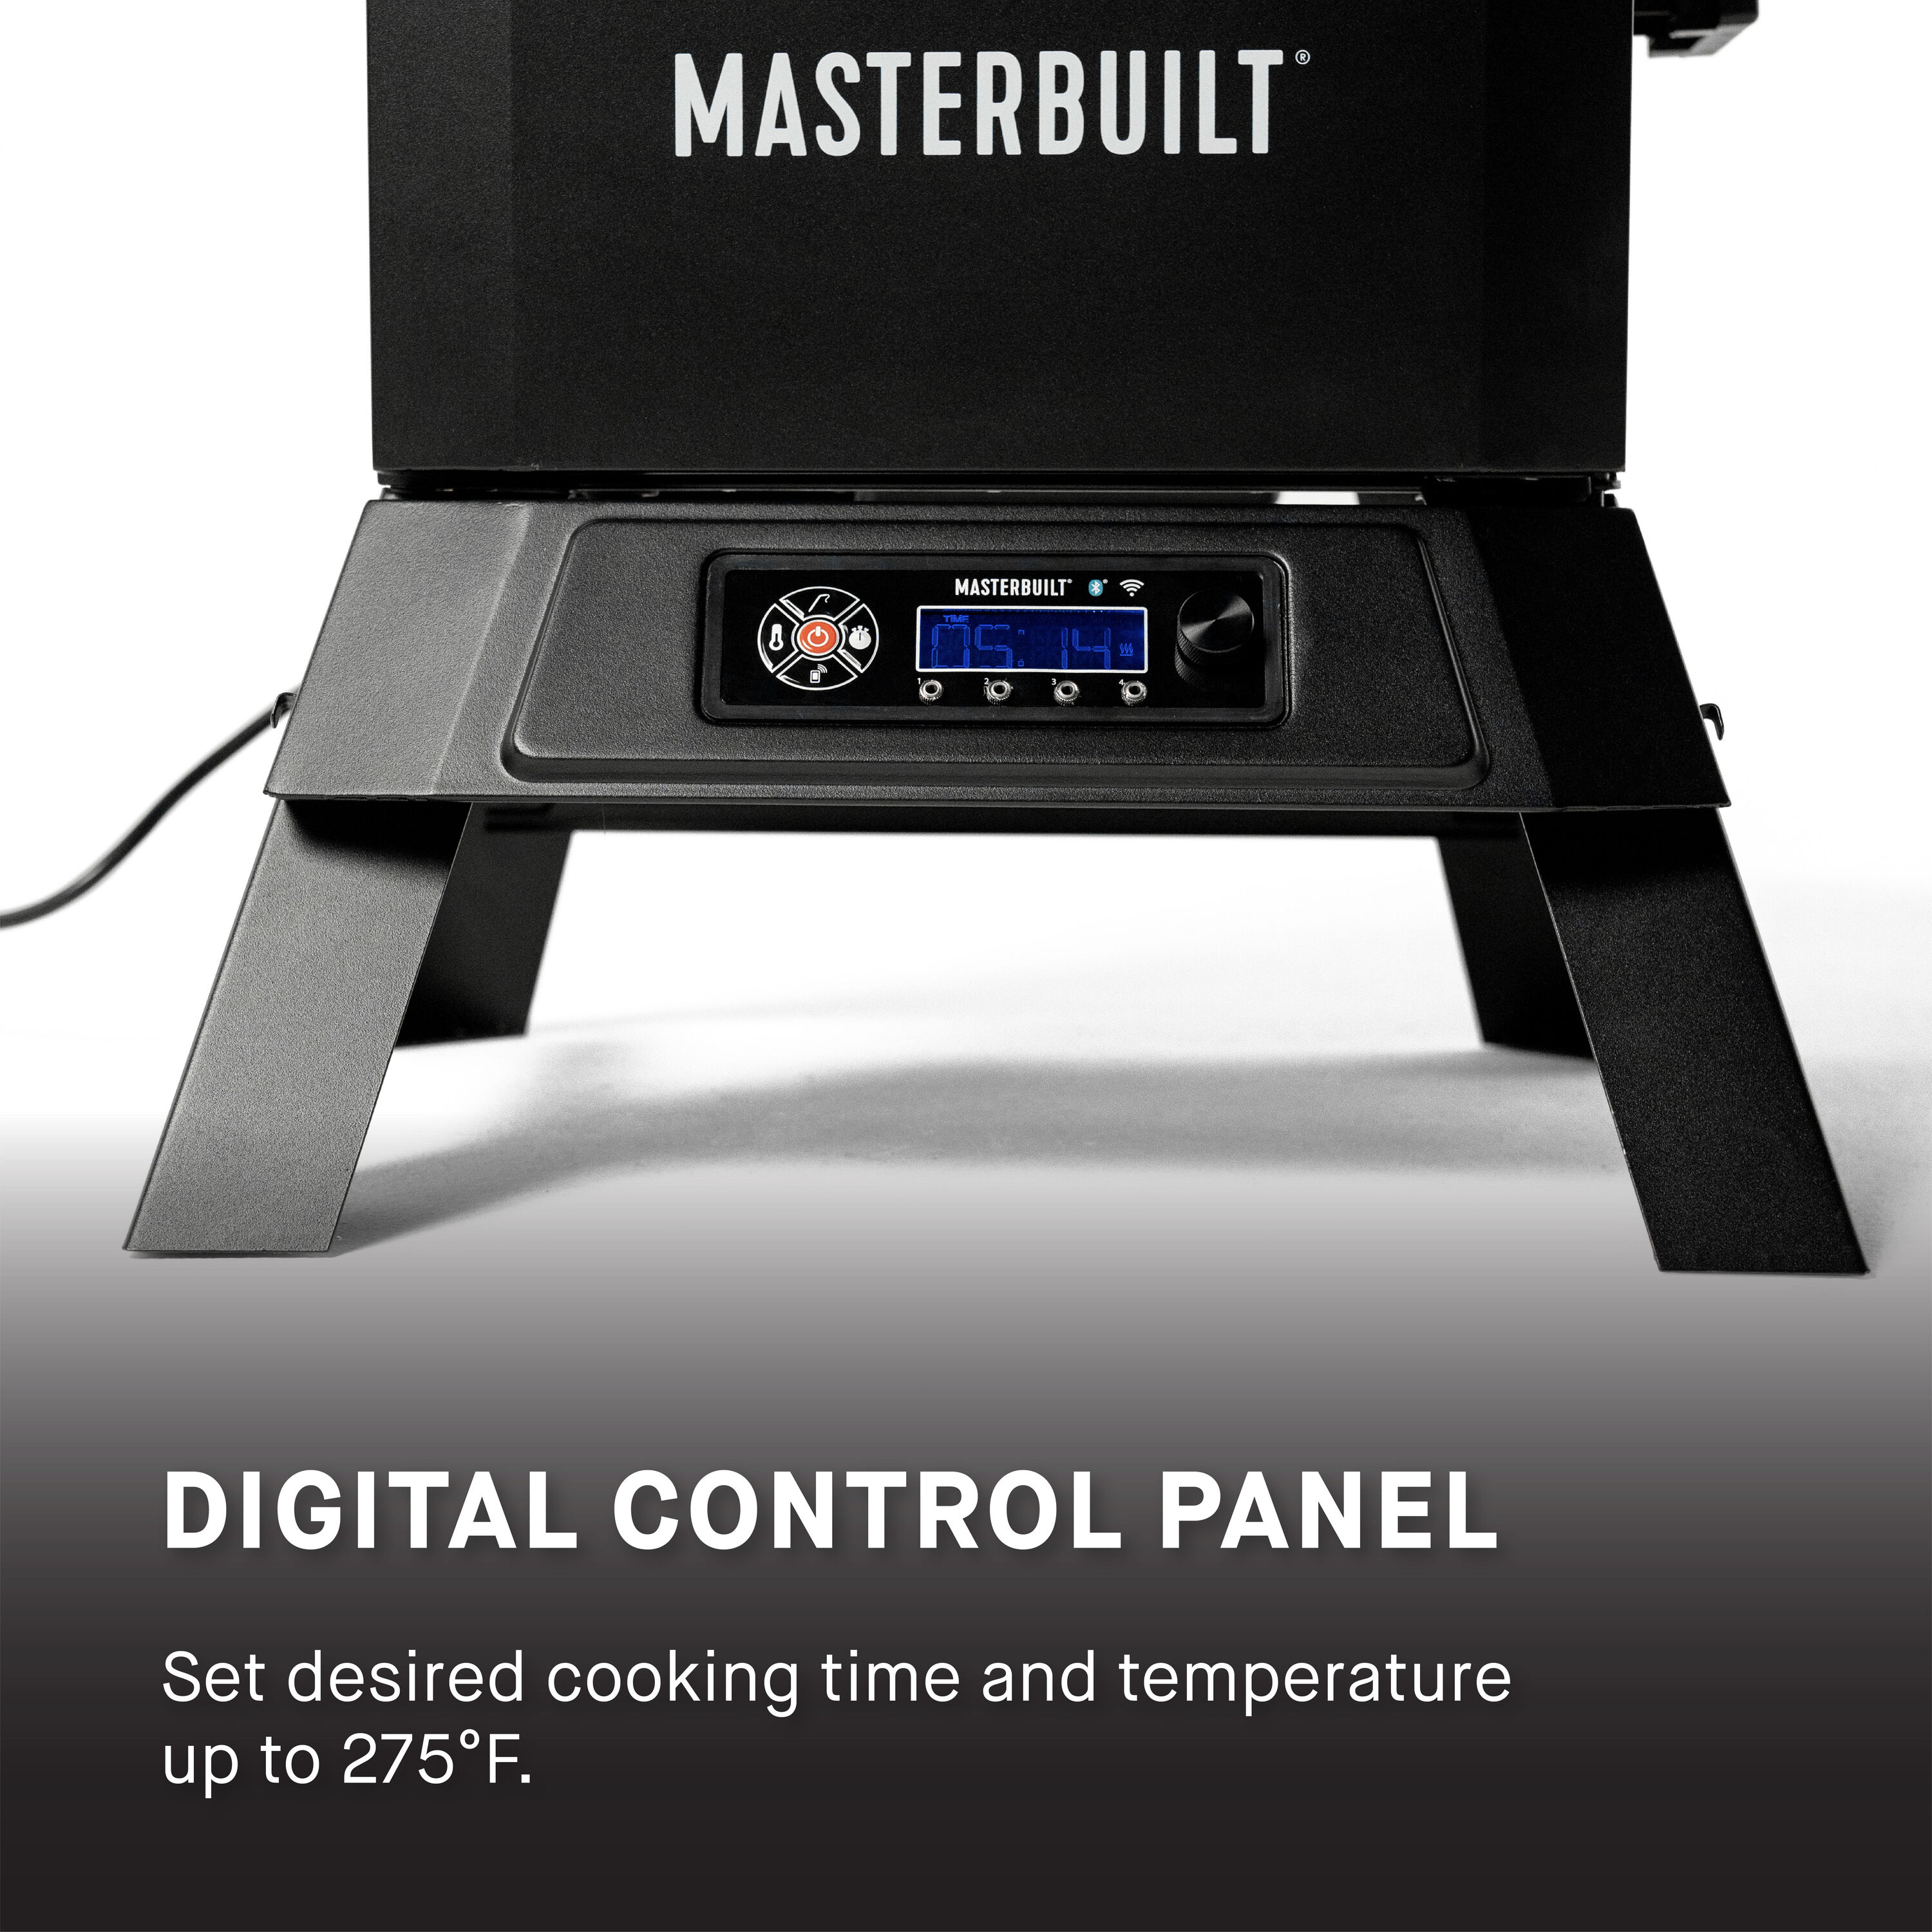 Masterbuilt 30 inch Digital Smoker, ThermoPro TP920 Meat Thermometer, First Smoke